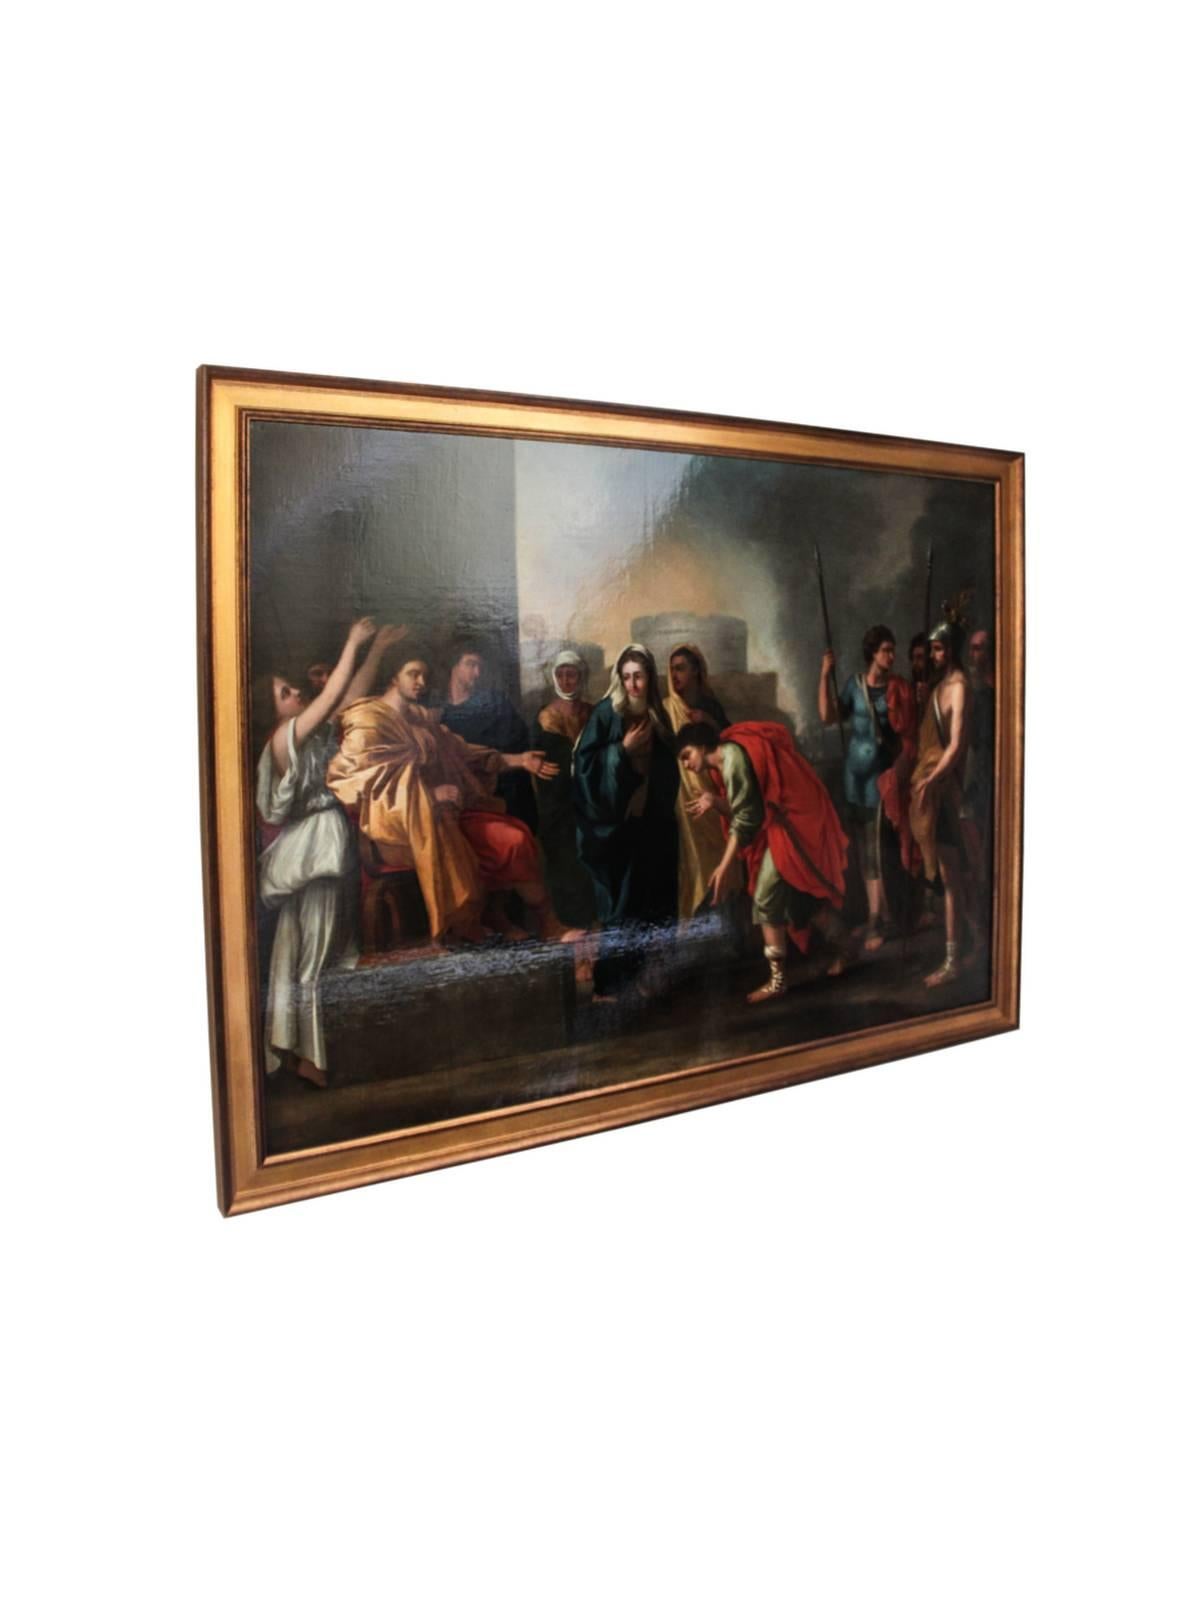 The Continence of Scipio in the Manner of Nicolas Poussin - Painting by Unknown